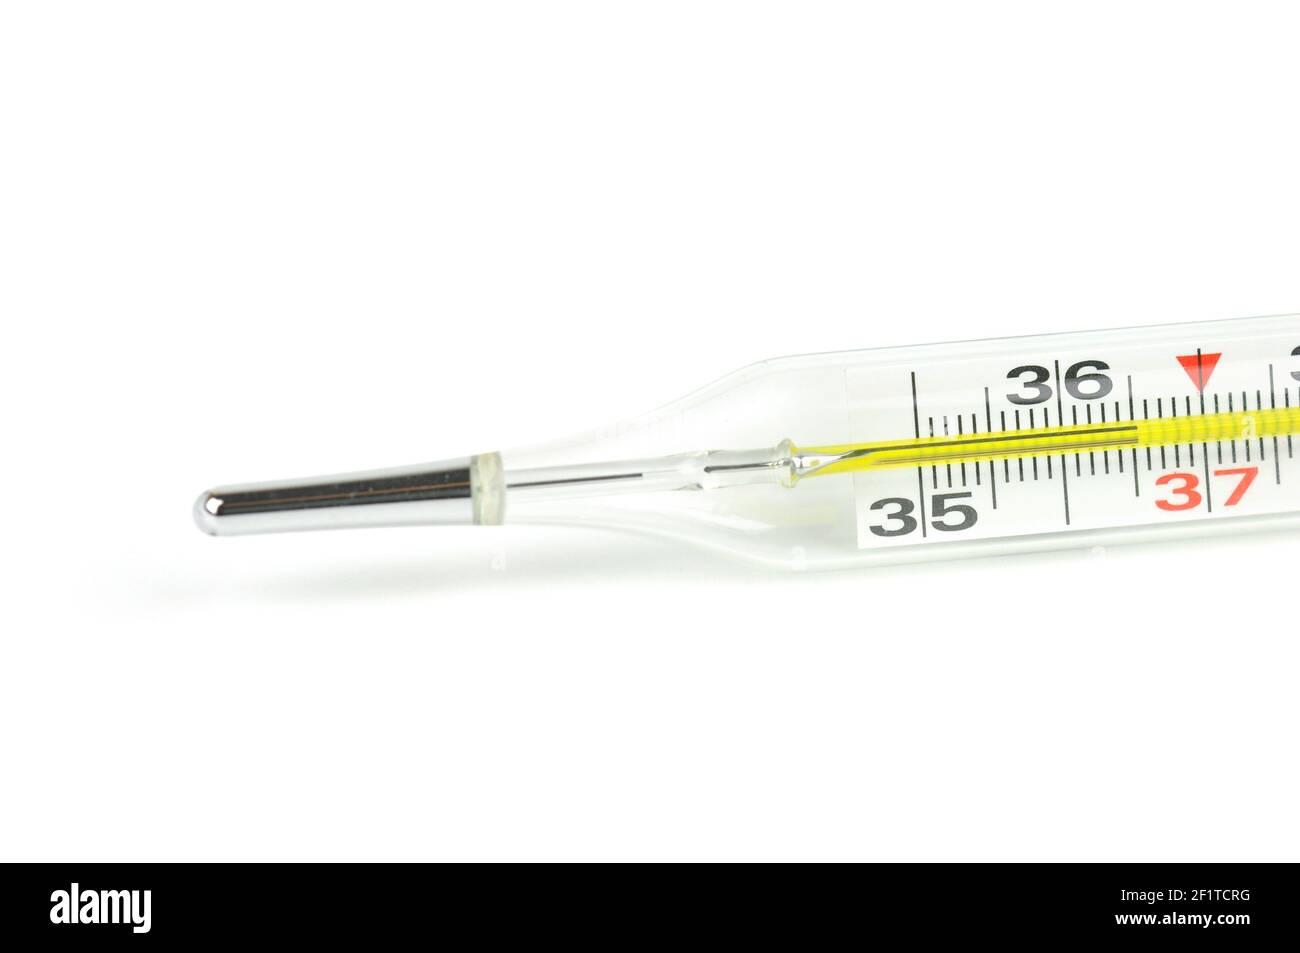 Mercury thermometer, isolated on white background. Thermometer showing the  temperature of a healthy man. 36.6 degrees Celsius Stock Photo - Alamy